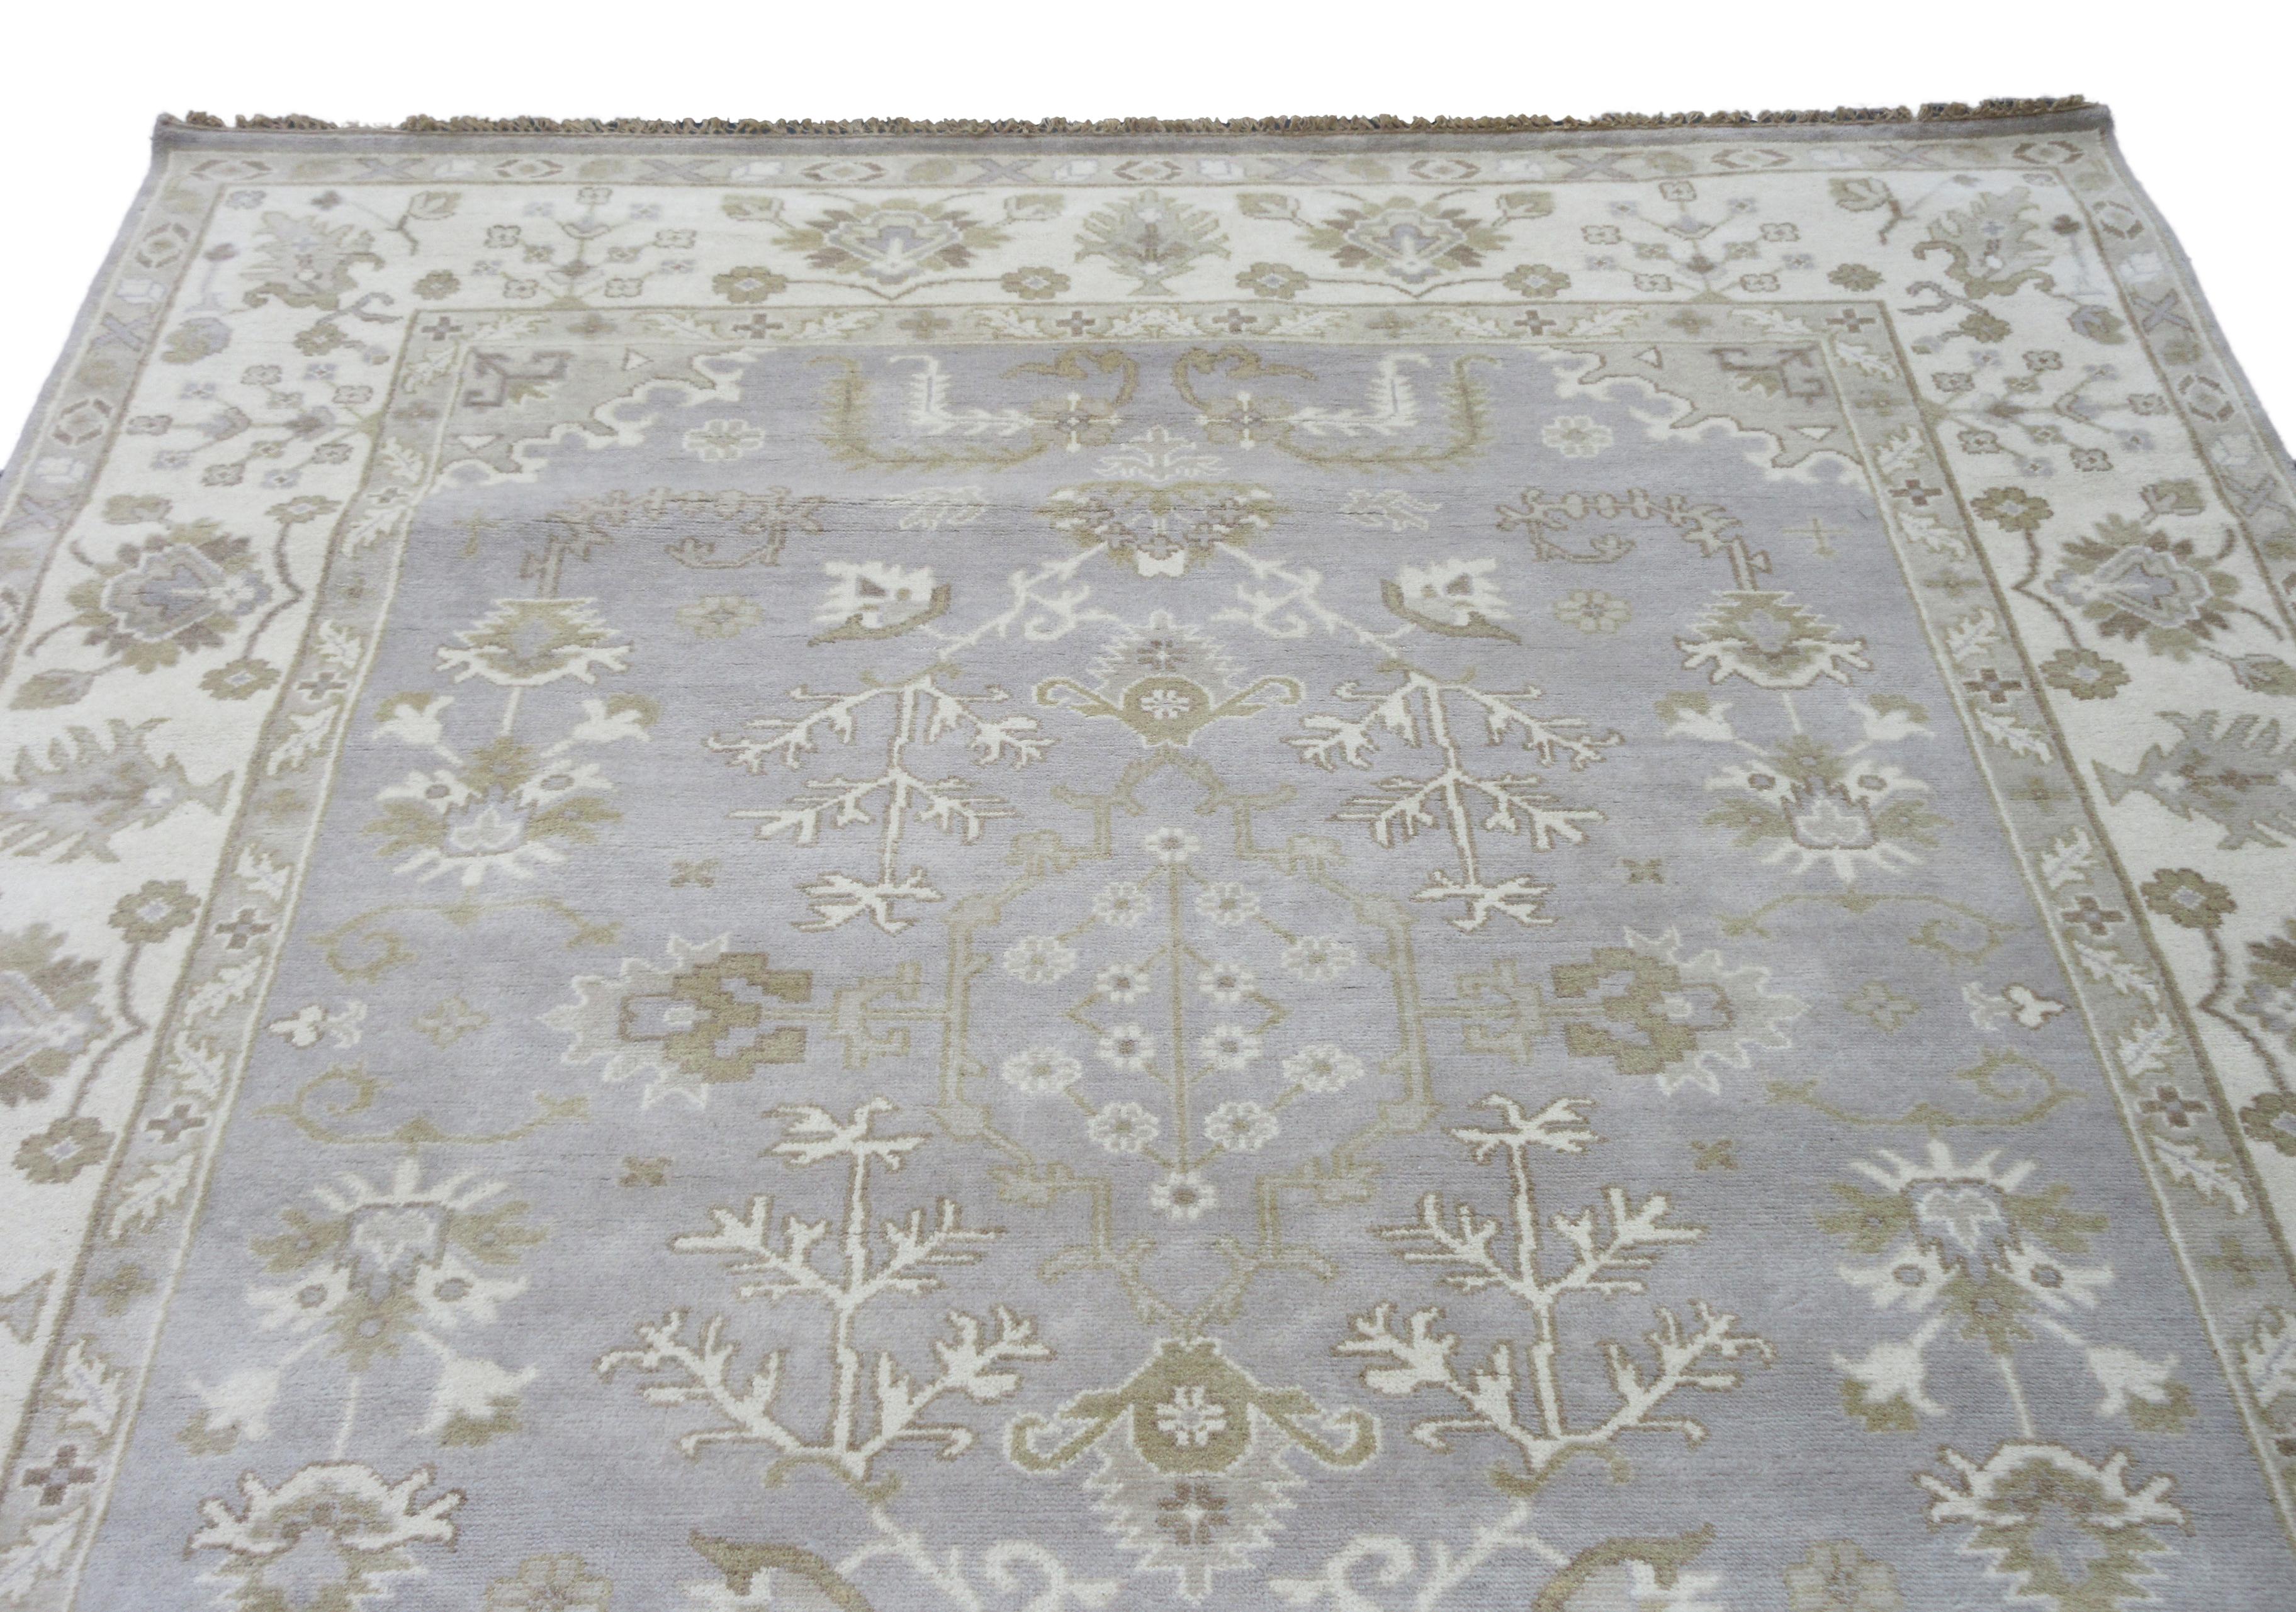 Hand-knotted, wool pile on a cotton foundation.

Dimensions: 9' x 12'

Origin: India

Field Color: Silver

Border Color: Ivory

Accent Colors: Brown, Gray.